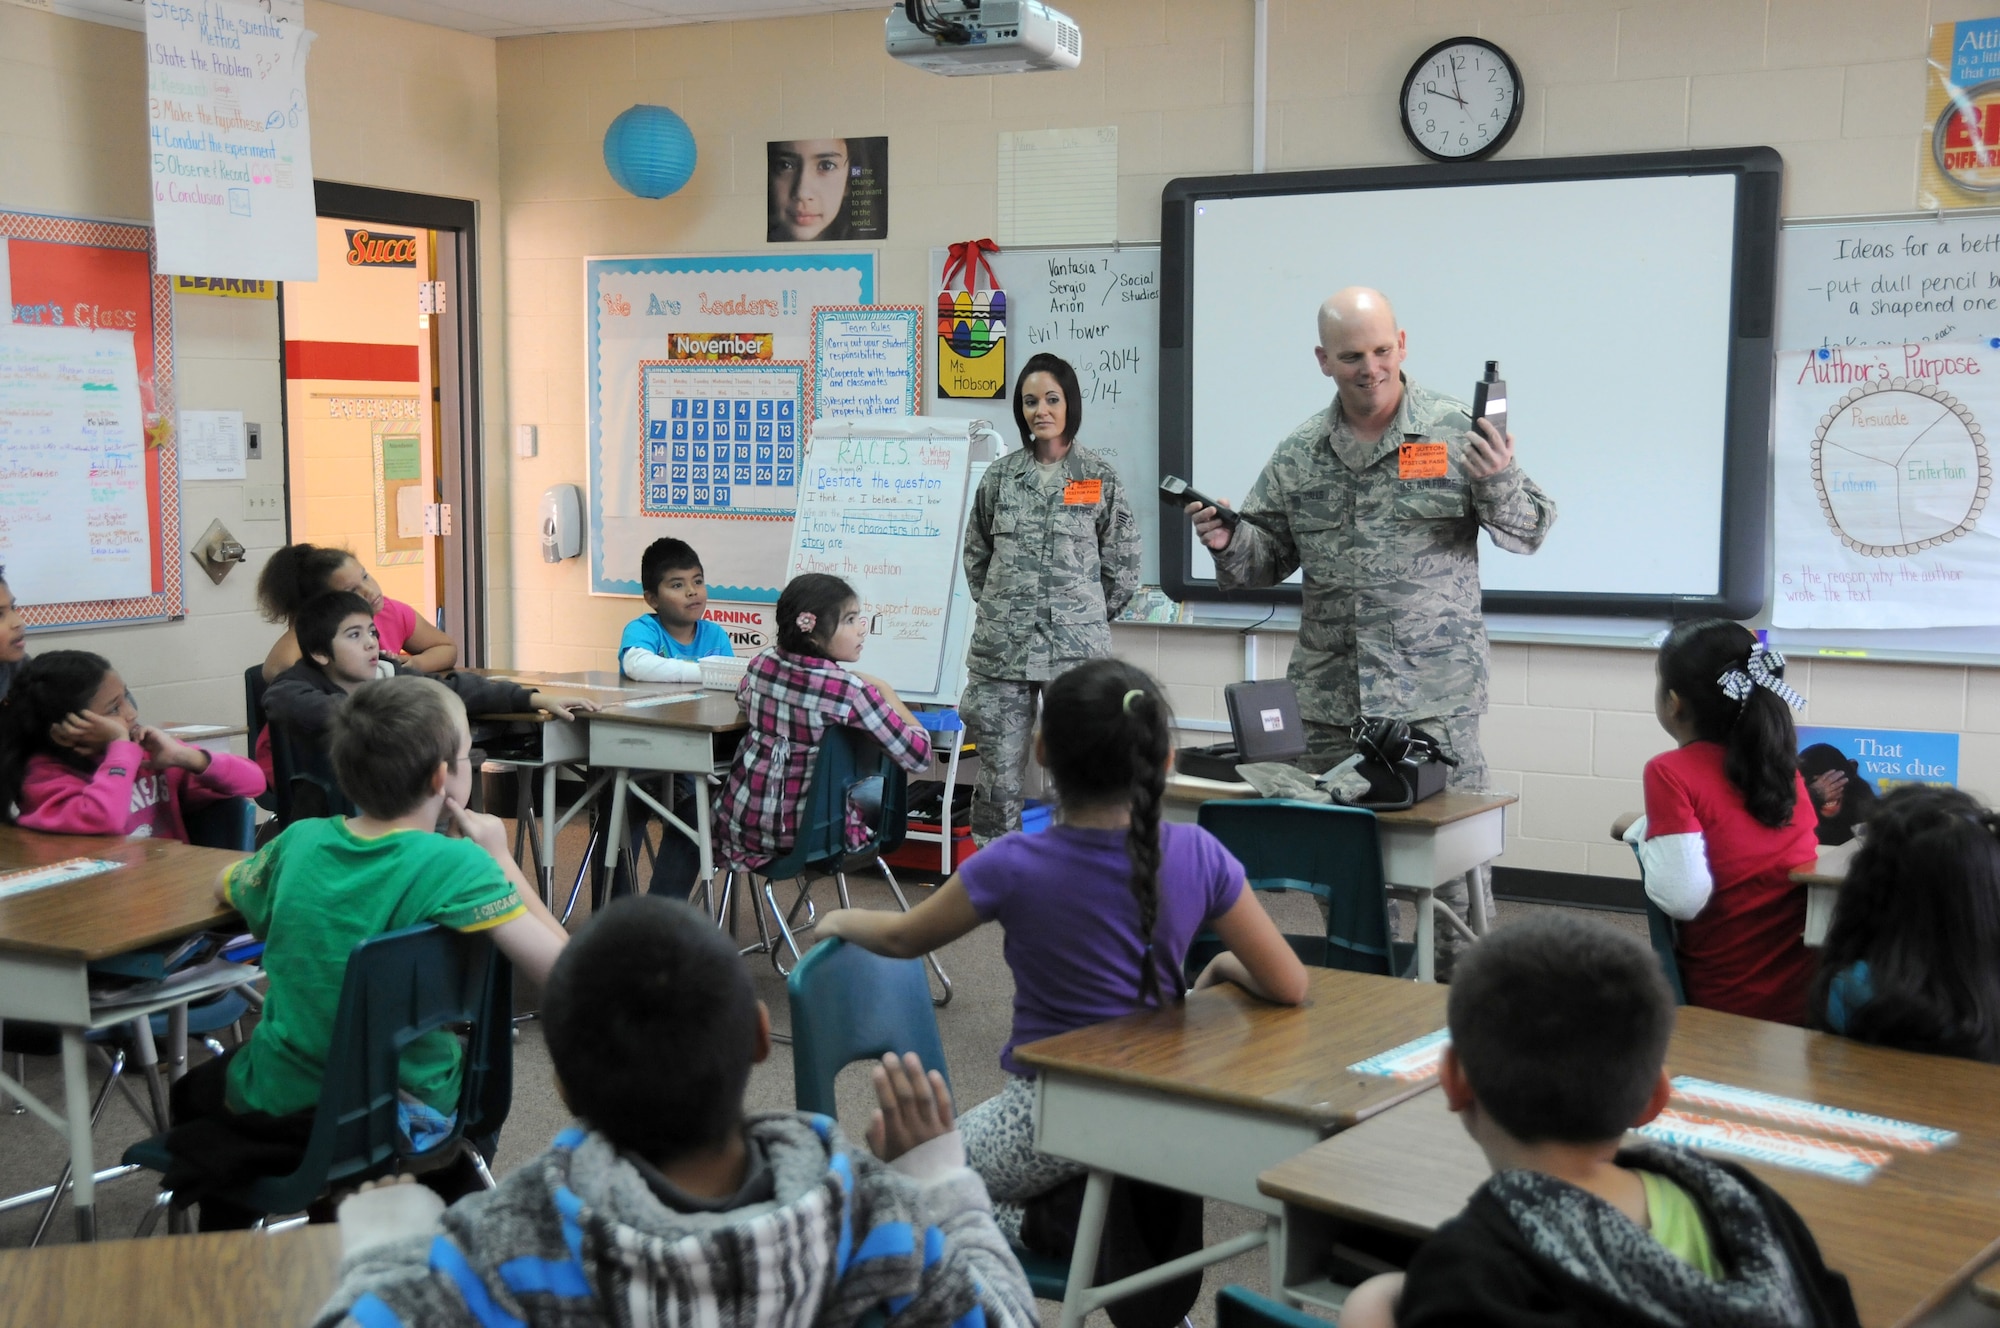 Senior Airman Kristen Grimm and Master Sgt. Greg Qualls present vehicle maintenance equipment to students at during career day at Sutton Elementary, Nov. 6, 2014. Grimm and Qualls are assigned to the 188th Logistics Readiness Squadron. The event was part of the Fort Smith Public School Partners in Education program. (U.S. Air National Guard photo by Airman 1st Class Cody Martin/Released)